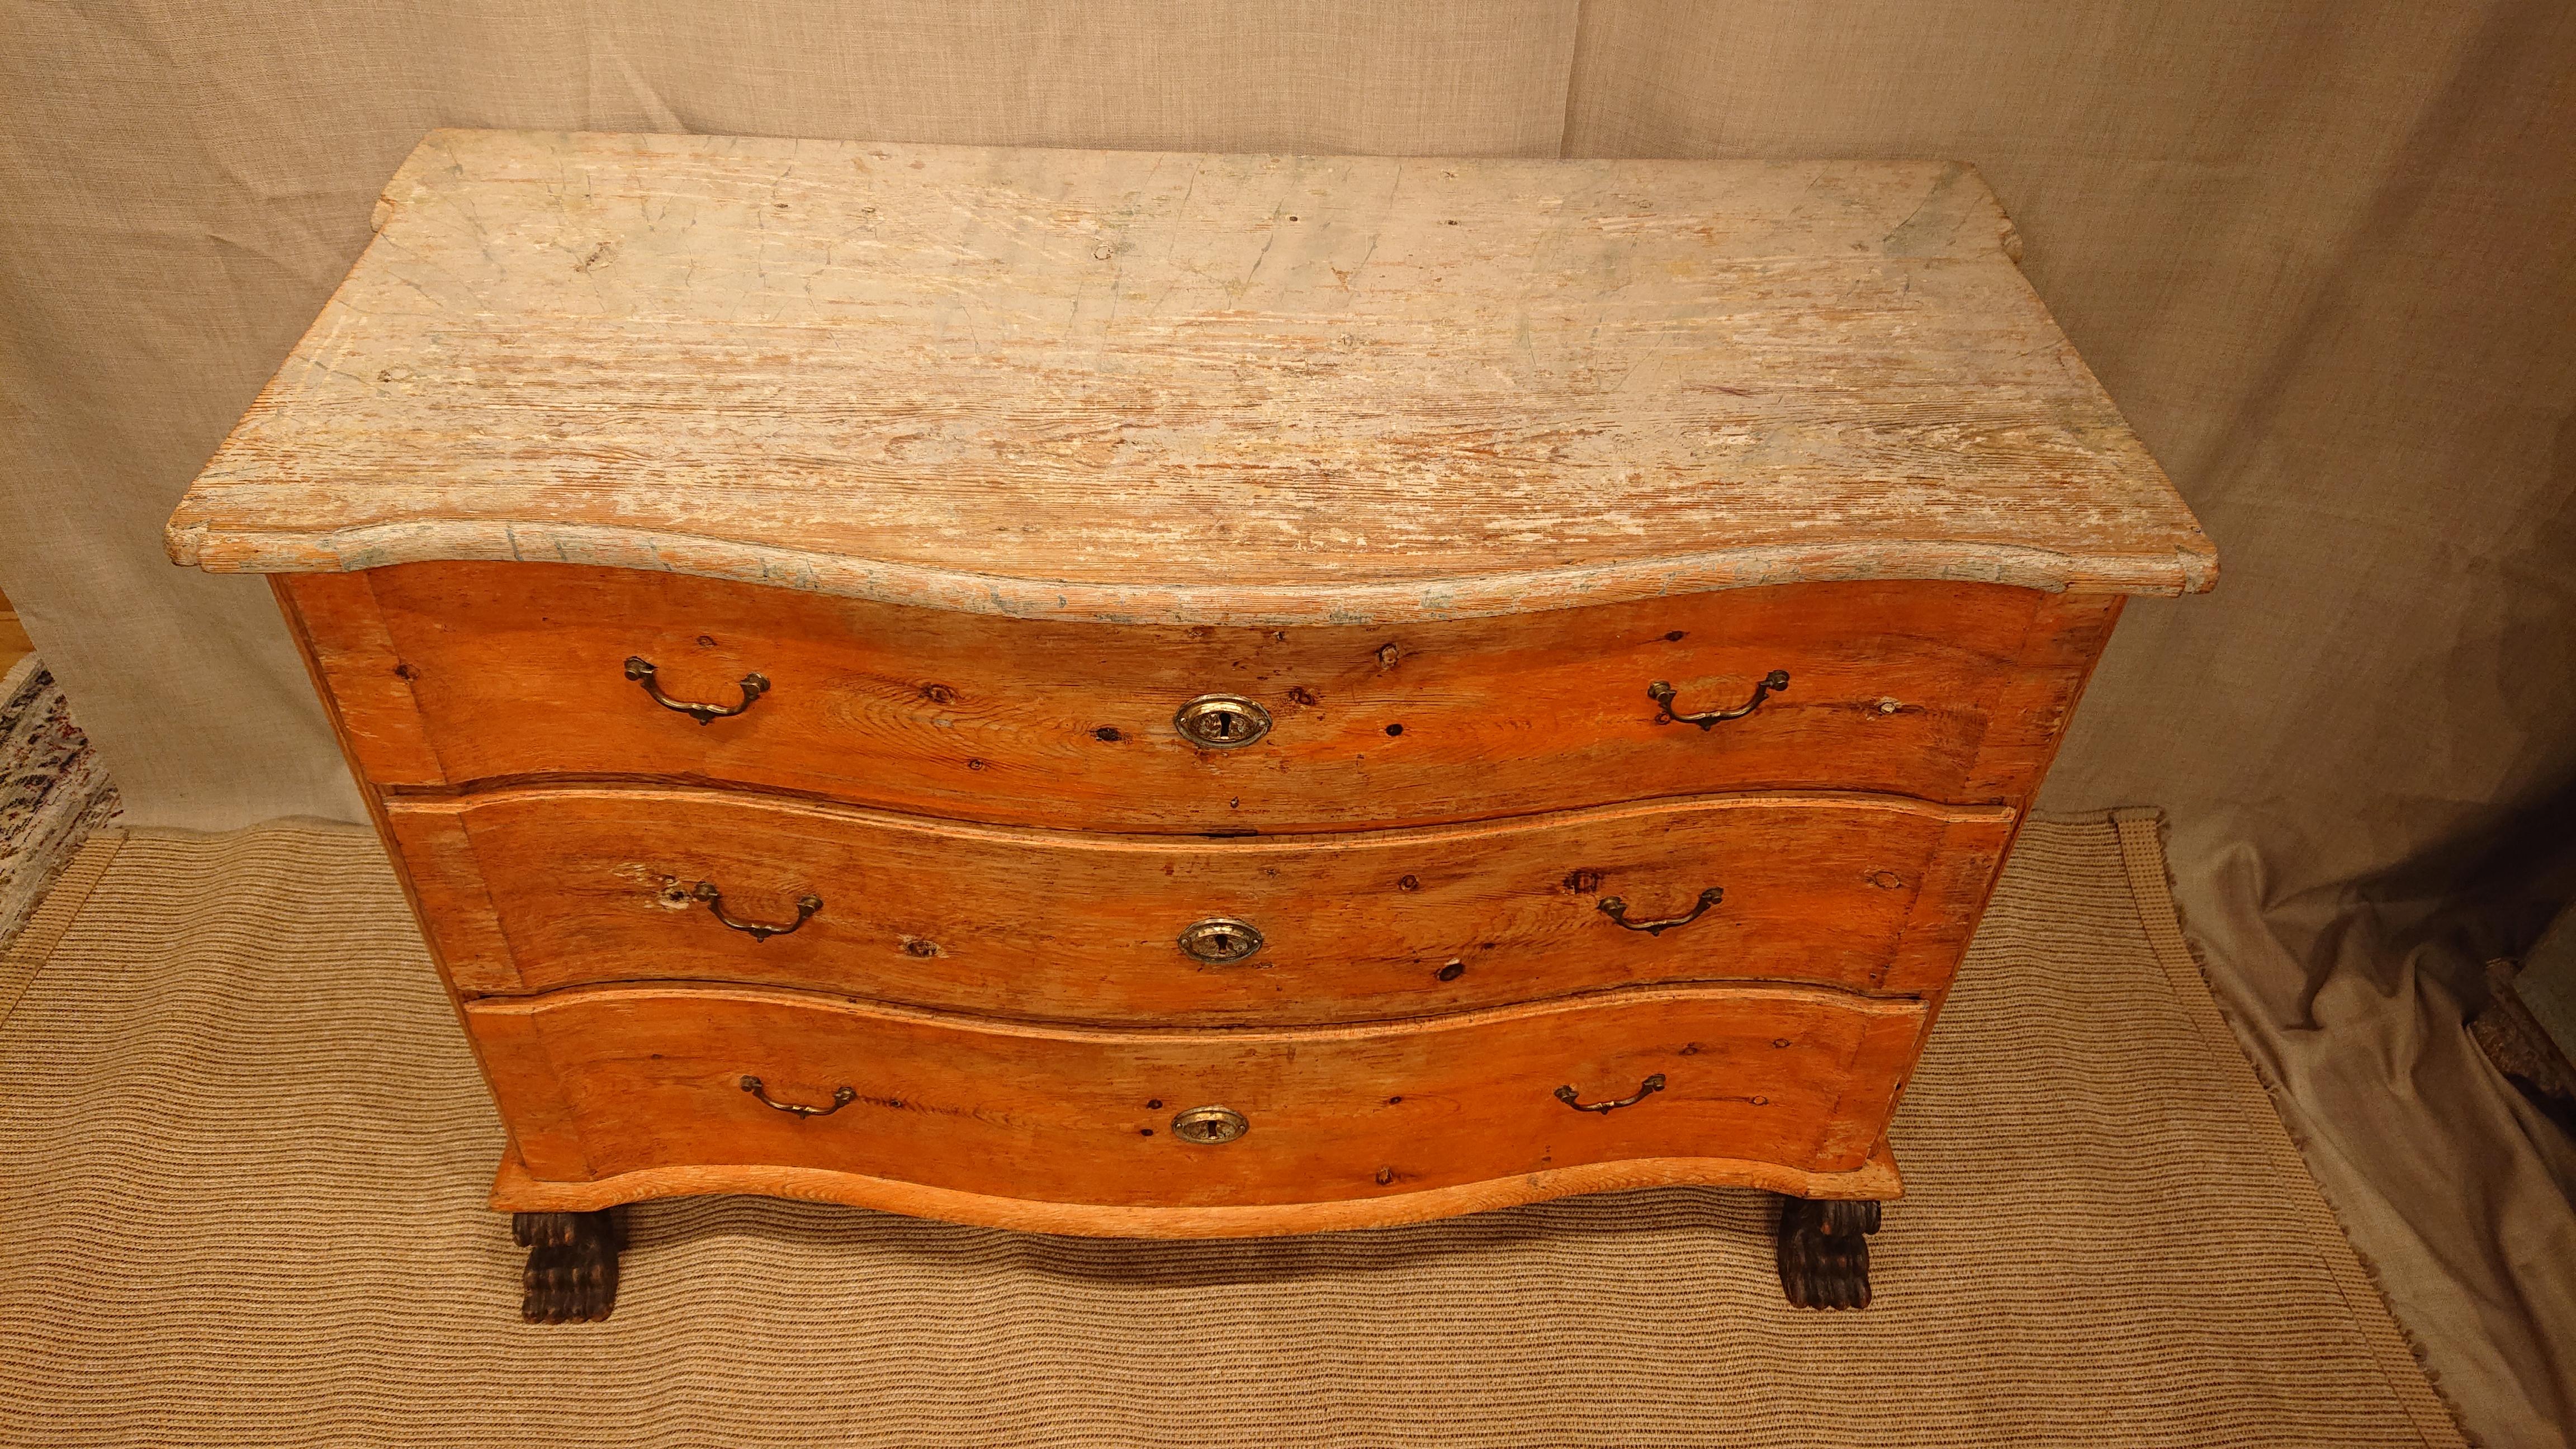 Hand-Crafted 19th Century Swedish Style Late Baroque Chest of Drawers with Original Paint